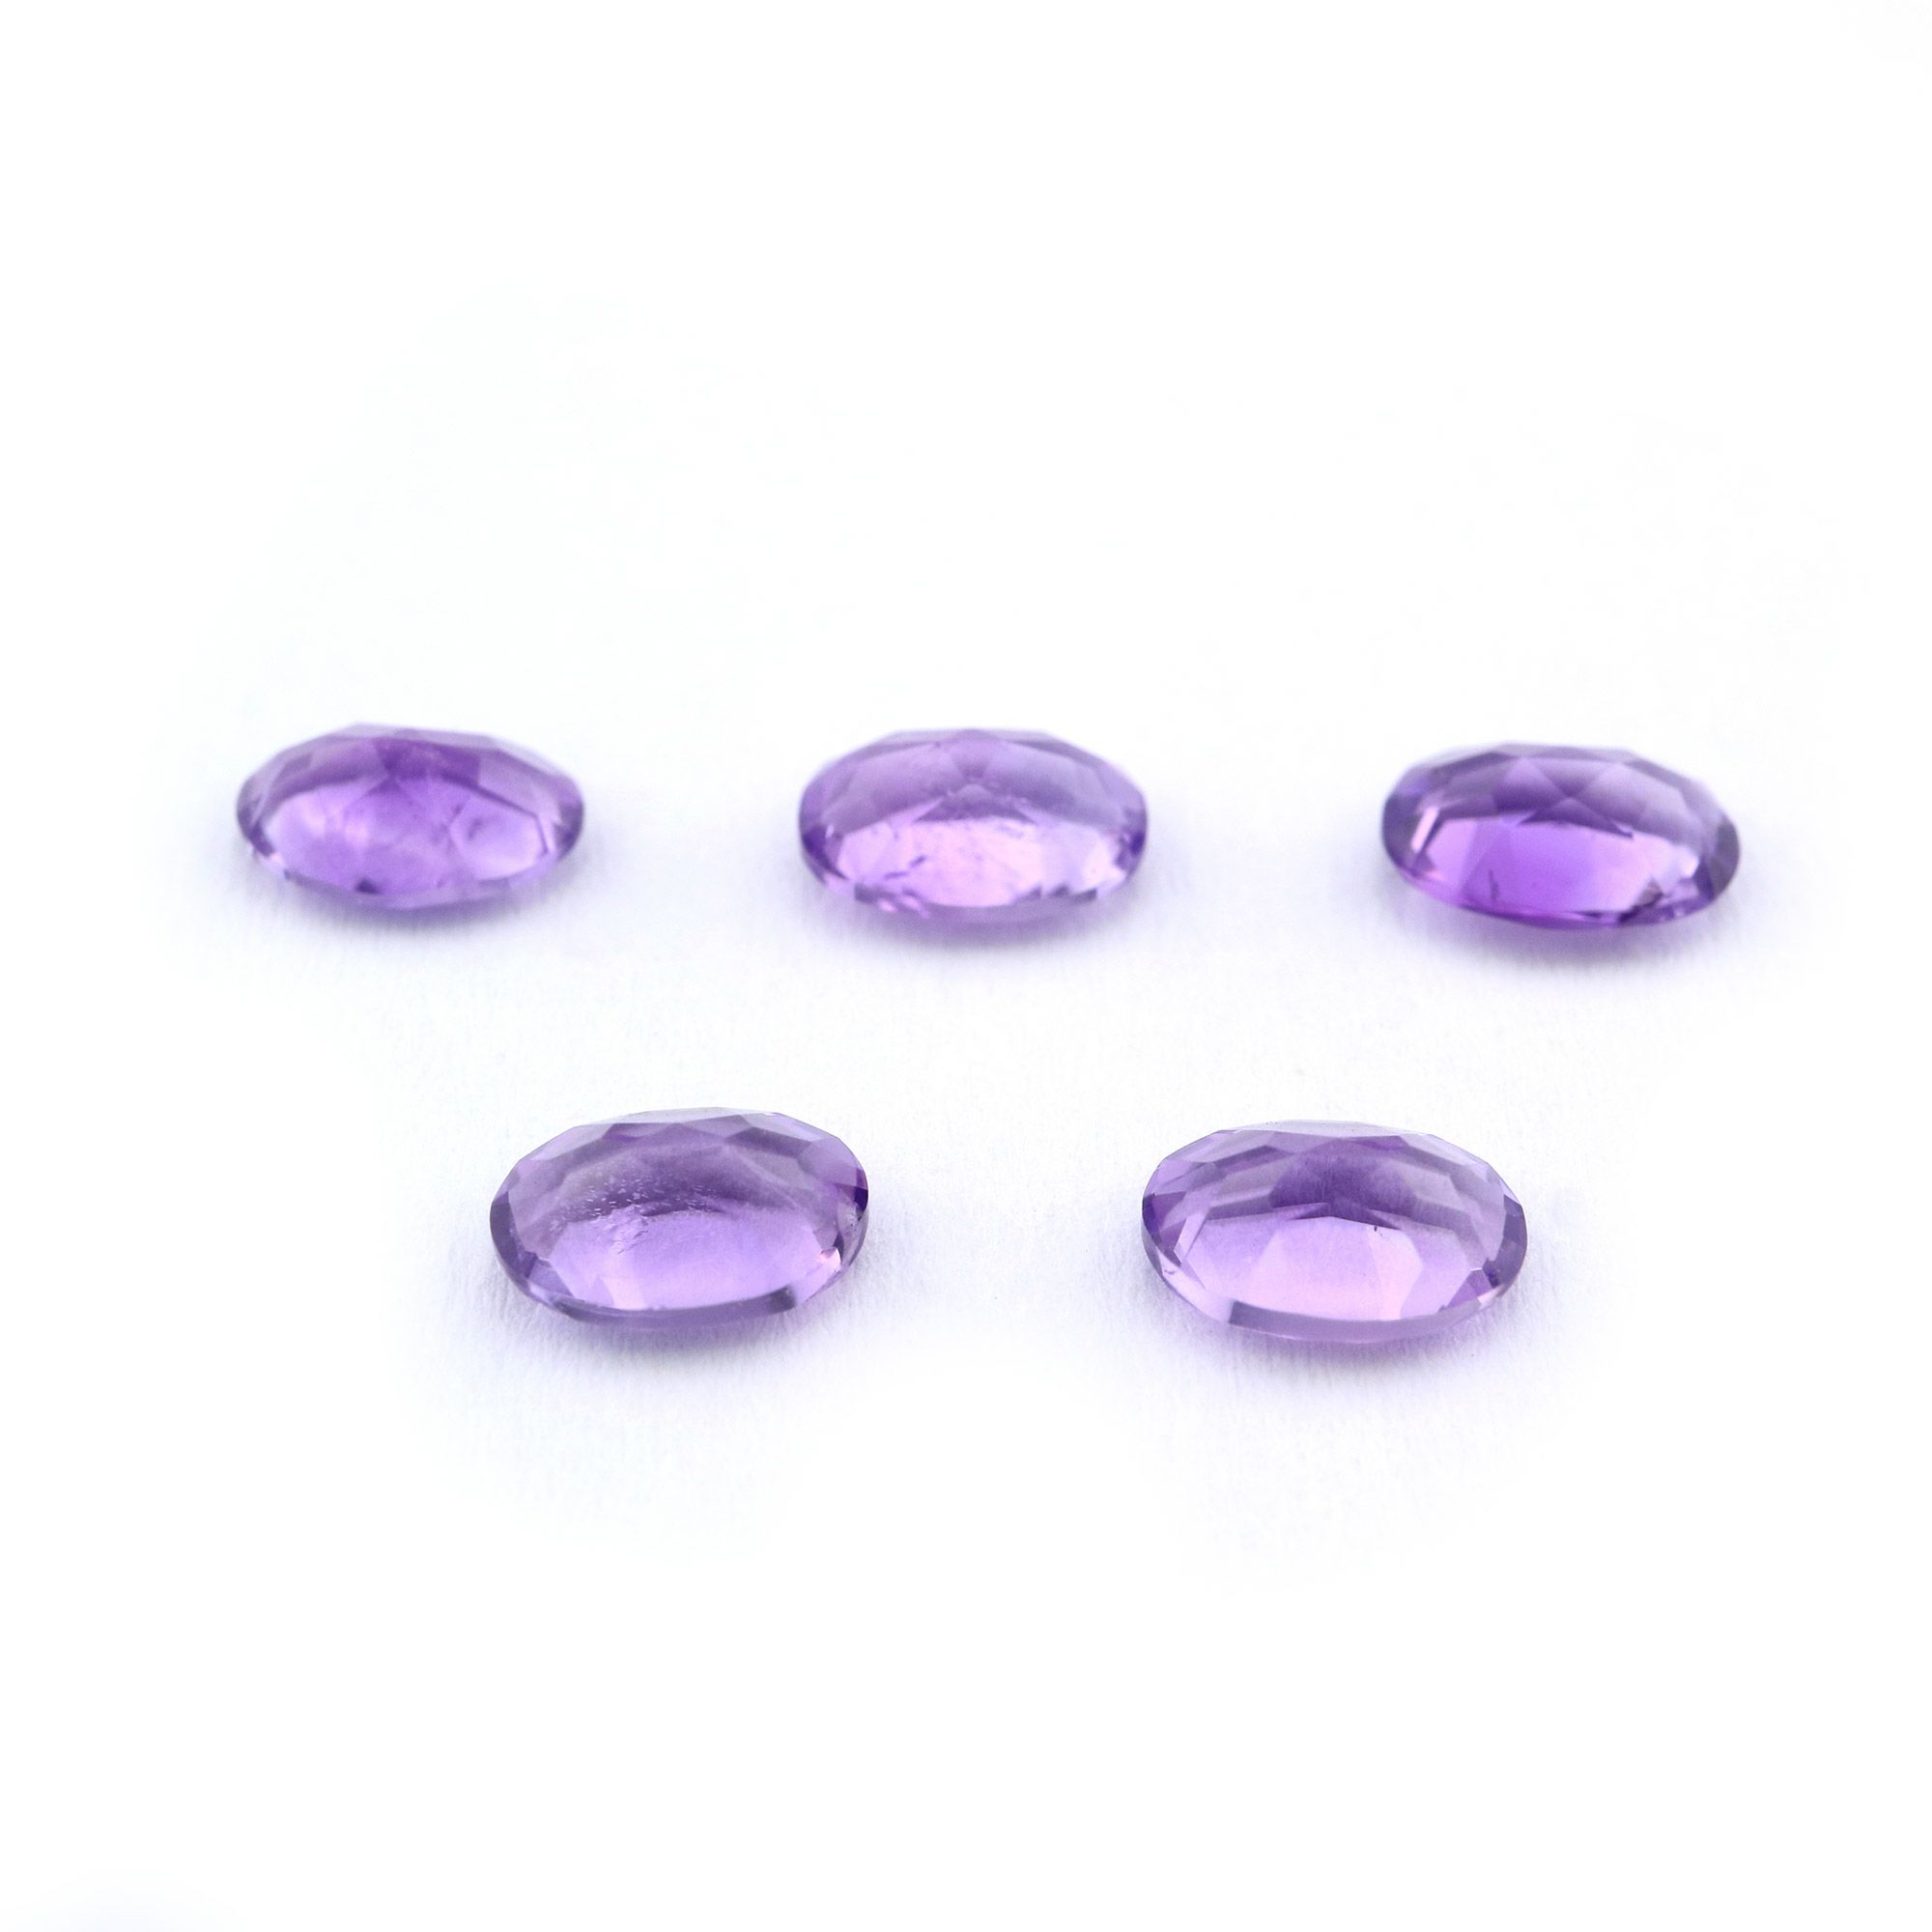 1Pcs Oval Purple Amethyst February Birthstone Faceted Cut Loose Gemstone Natural Semi Precious Stone DIY Jewelry Supplies 4120123 - Click Image to Close